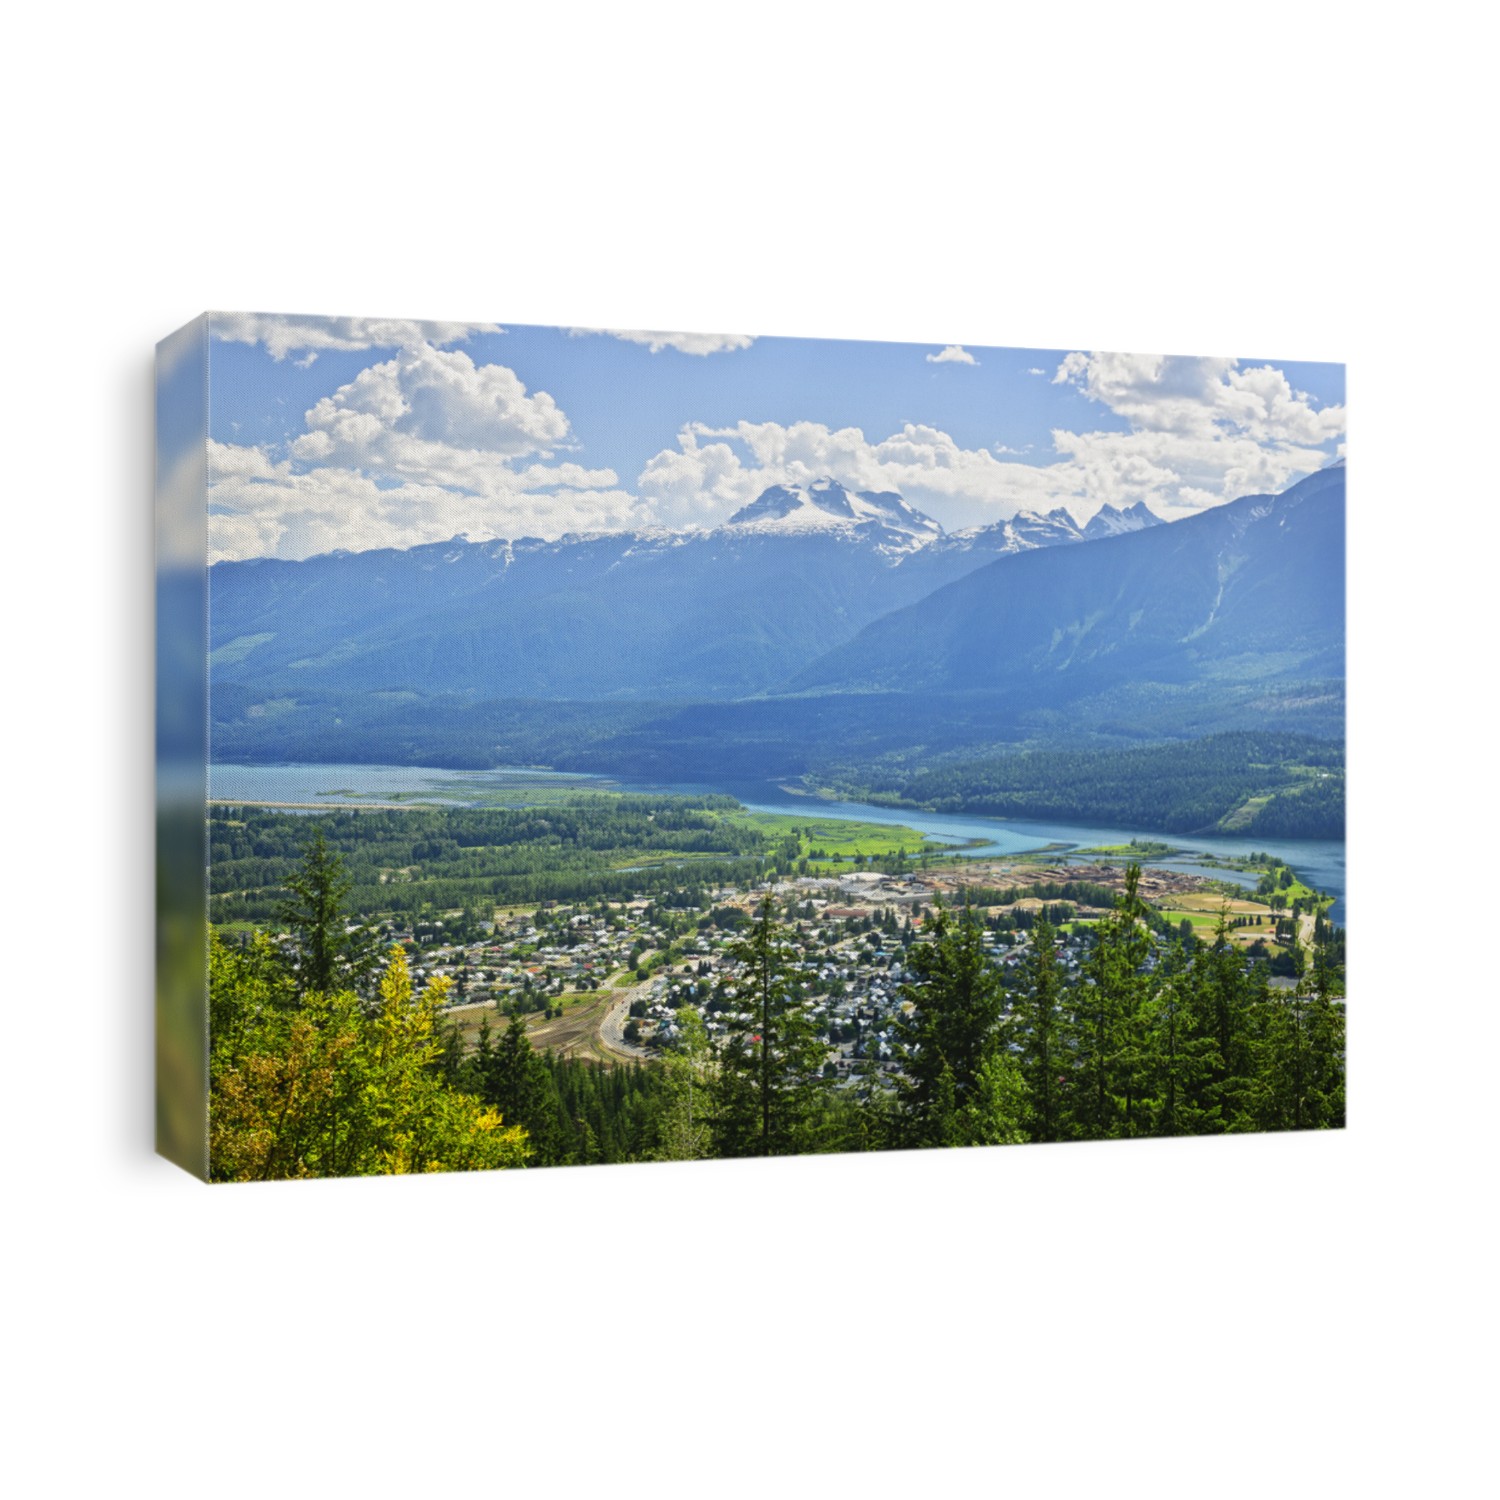 View of Revelstoke and Canadian Rockies in British Columbia, Canada